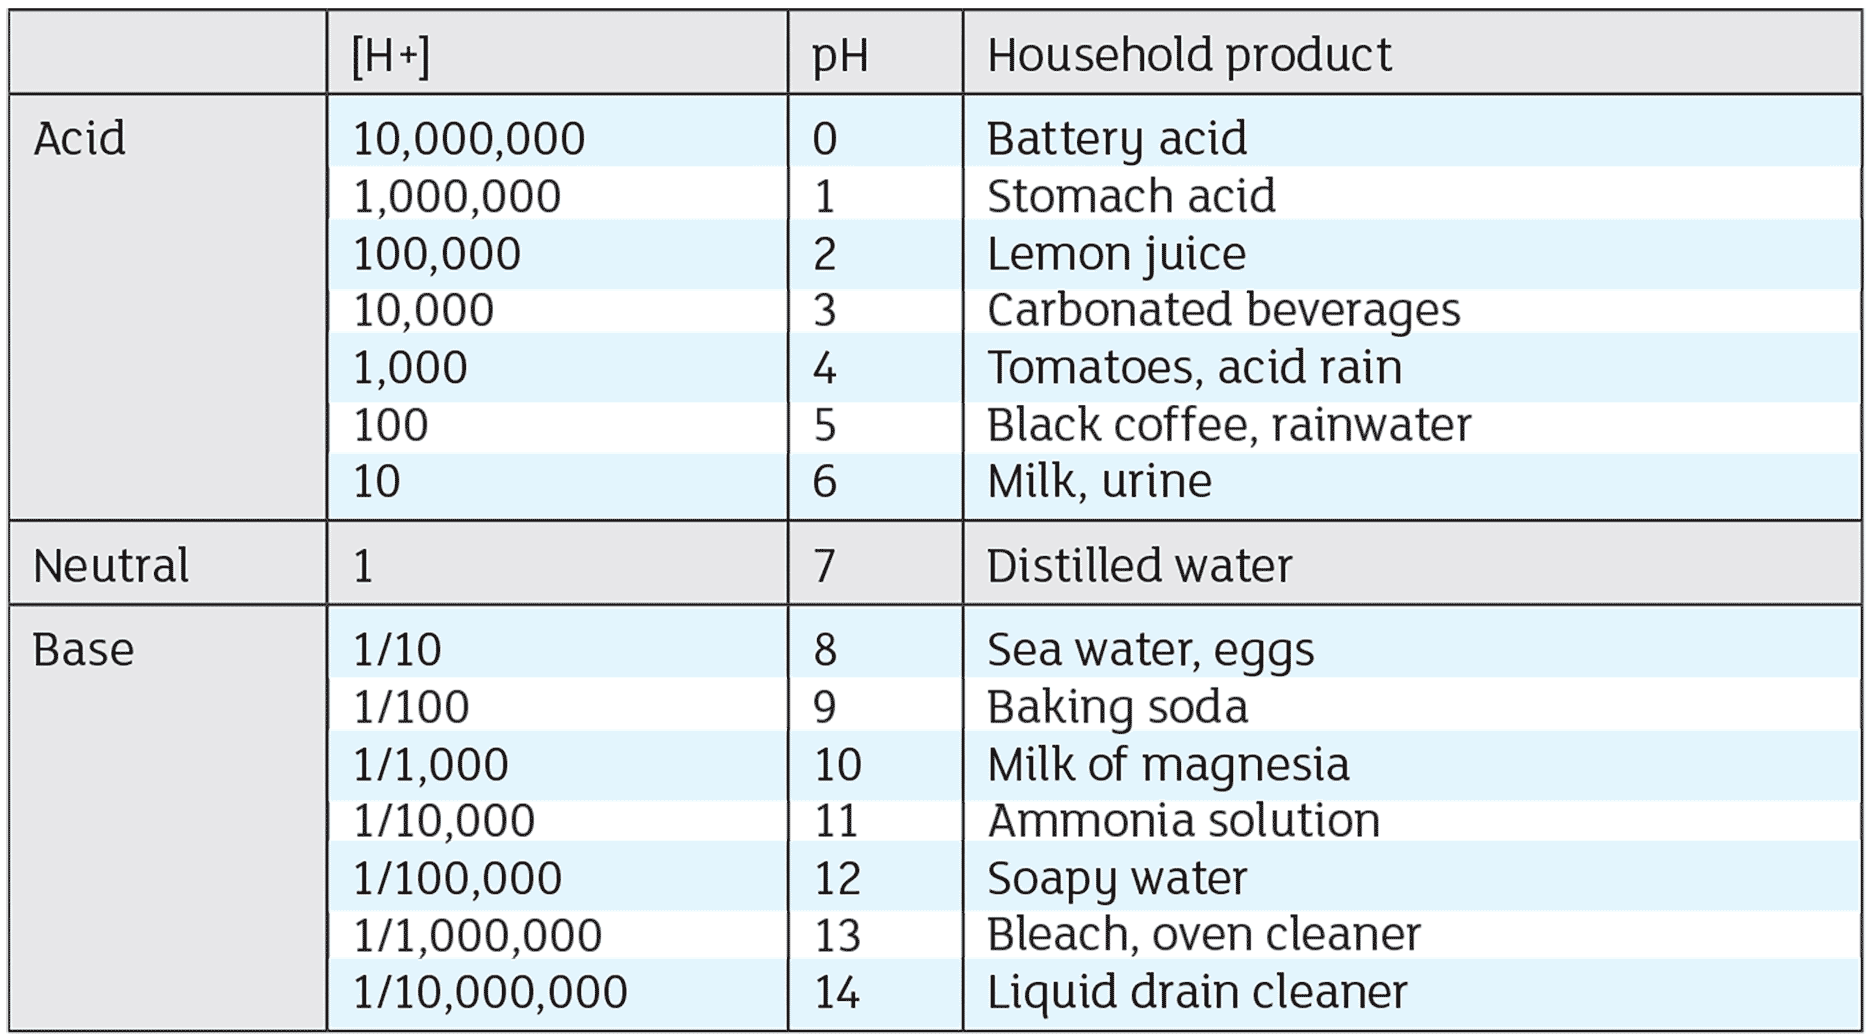 IMAGE 1: pH and hydrogen concentration of common household products. [H+] Concentration of hydrogen ions compared with distilled water. (Image courtesy of Fluid Sealing Association)